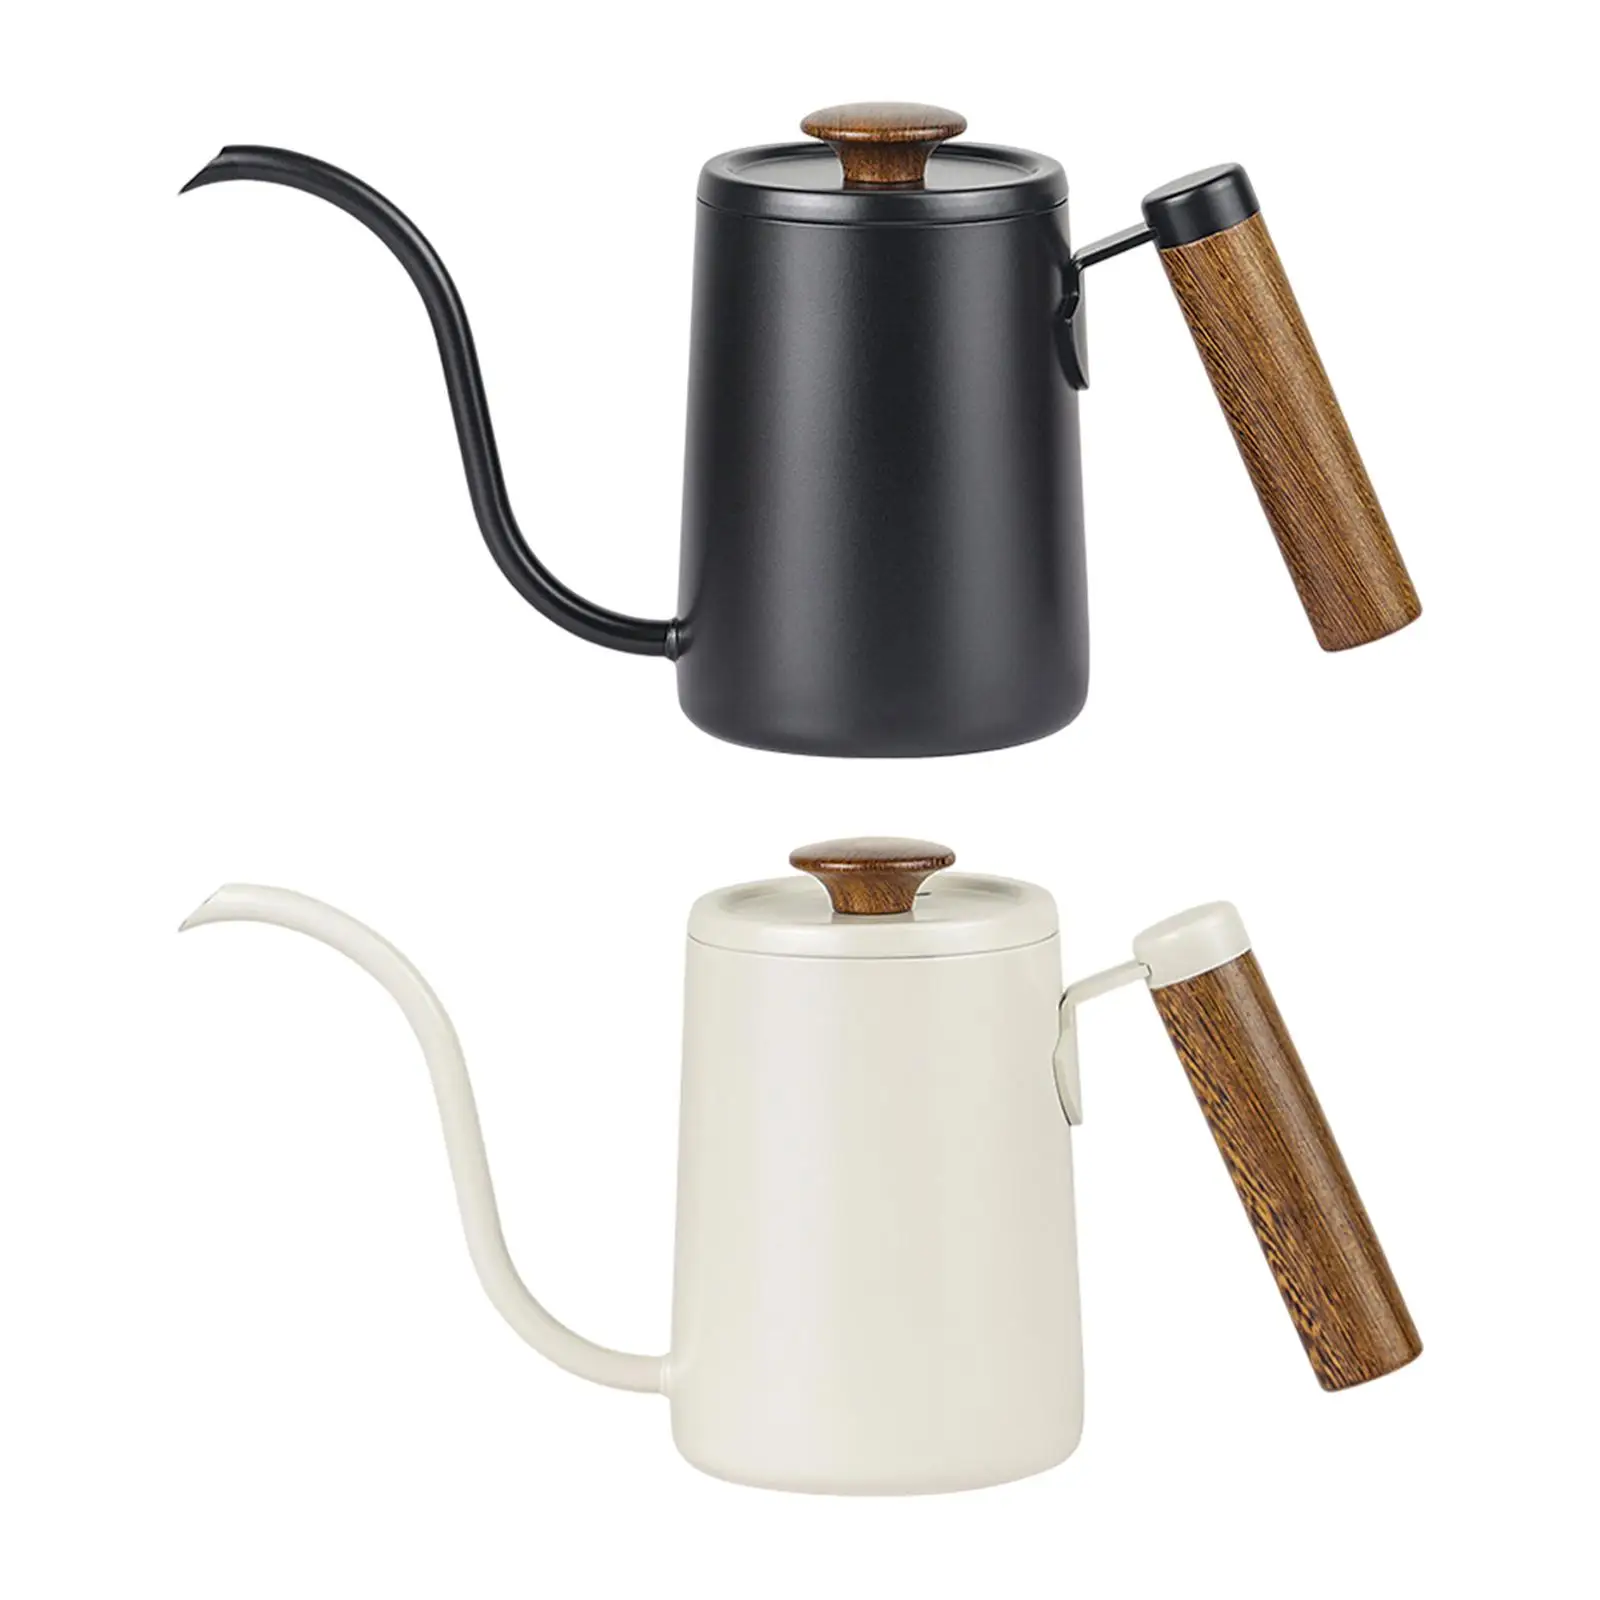 Drip Coffee Kettle Long Gooseneck Spout 600ml Ergonomic Handle Pour over Kettle for Cafe Bar Kitchen Outdoor Indoor Coffee Maker